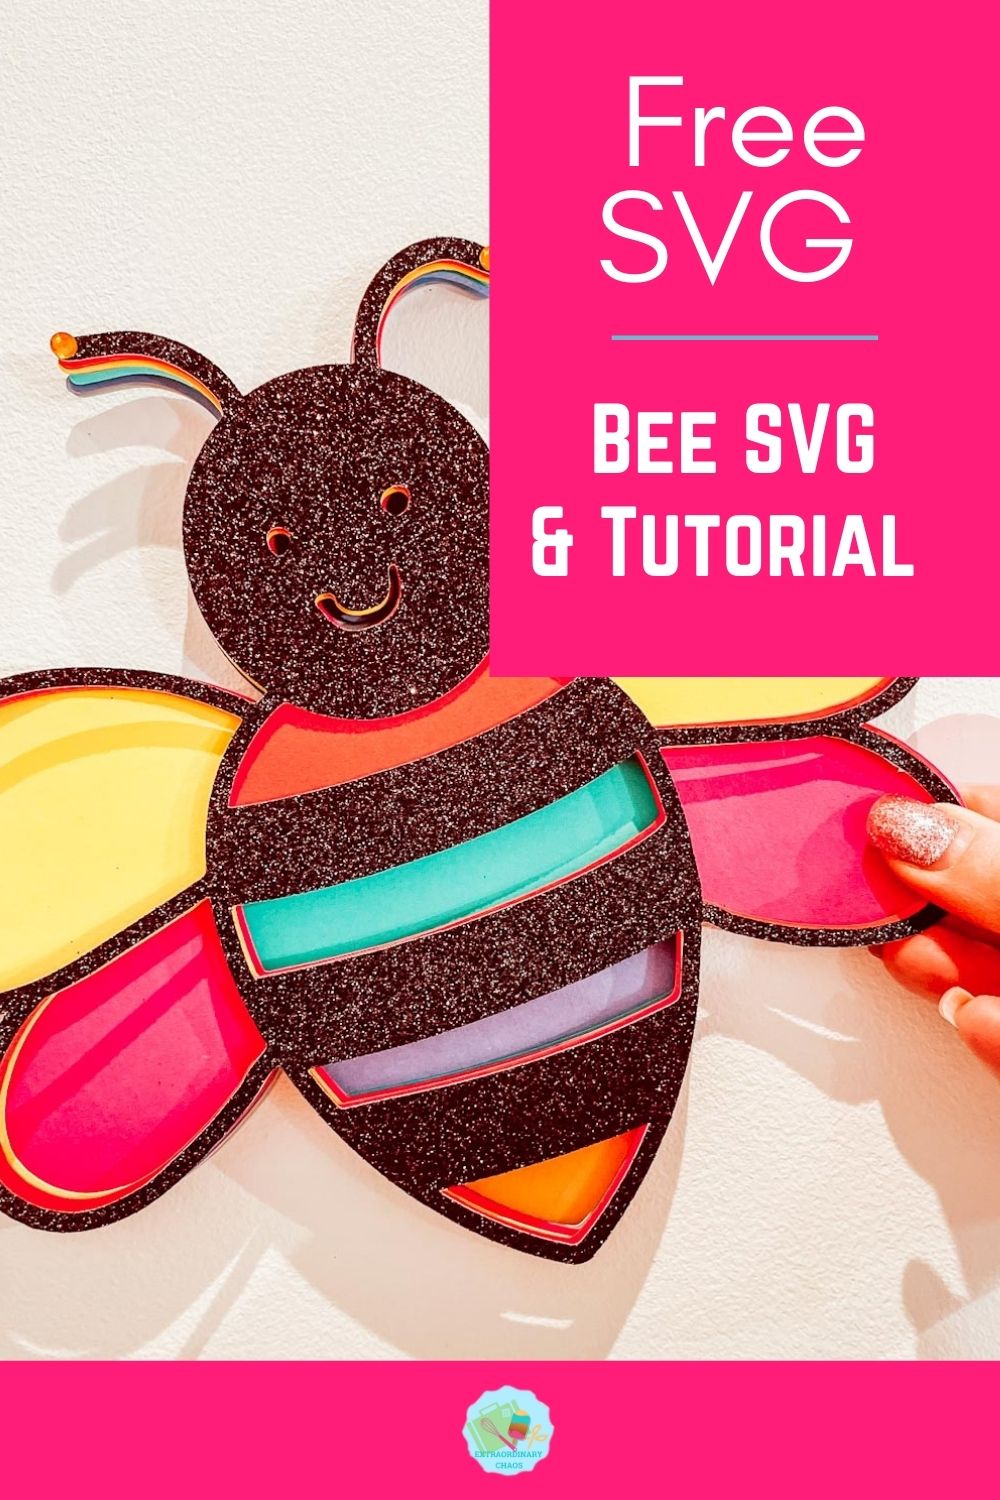 Free Bumble Bee SVG for Cricut, Glowforge and Silhouette